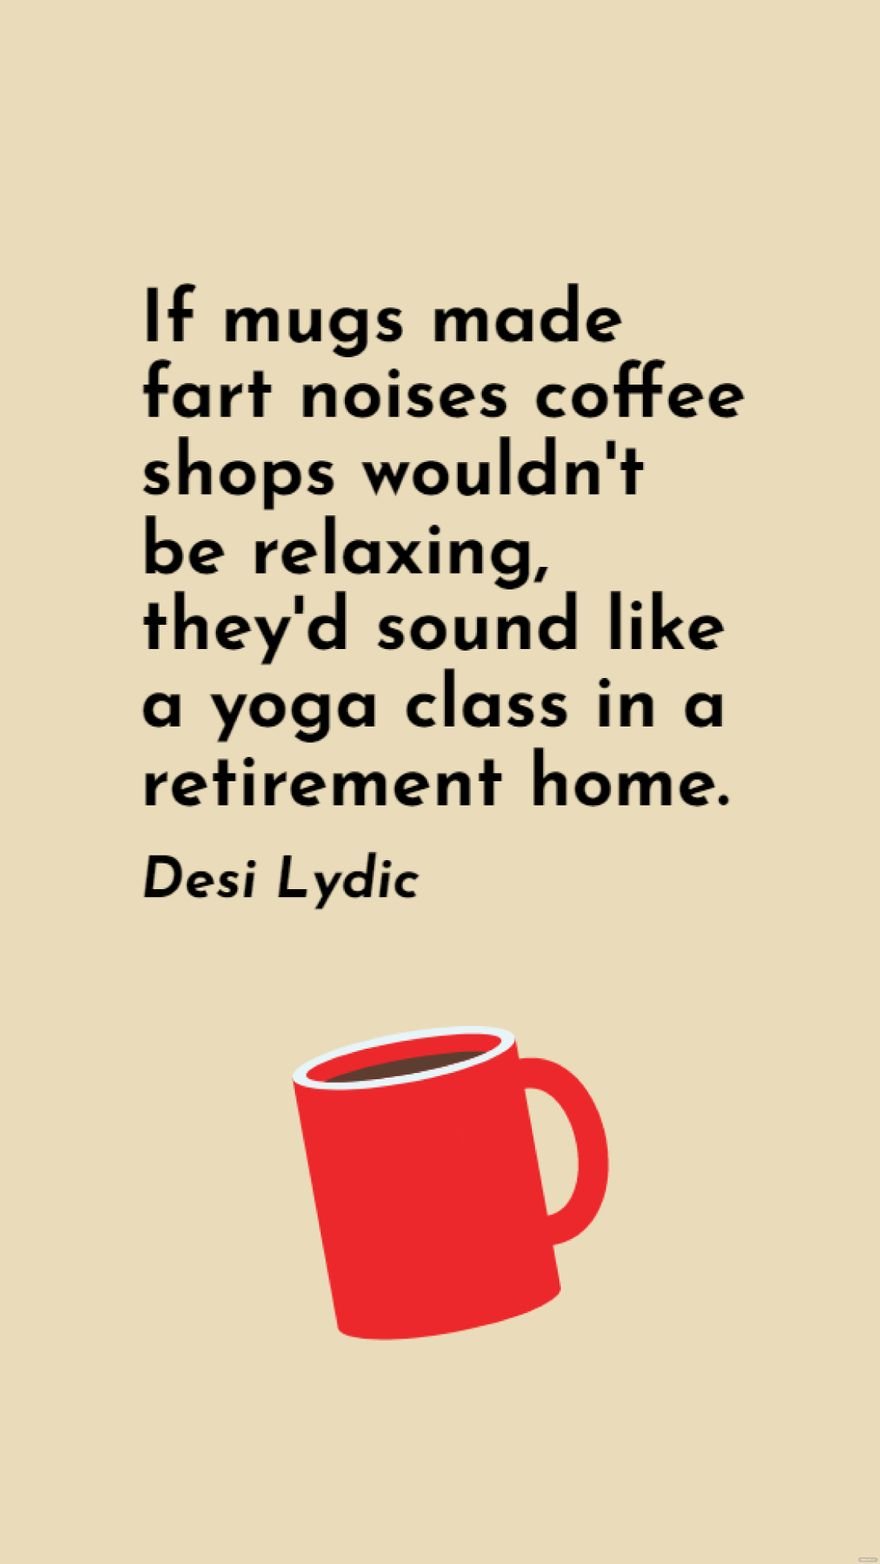 Desi Lydic - If mugs made fart noises coffee shops wouldn't be relaxing, they'd sound like a yoga class in a retirement home.